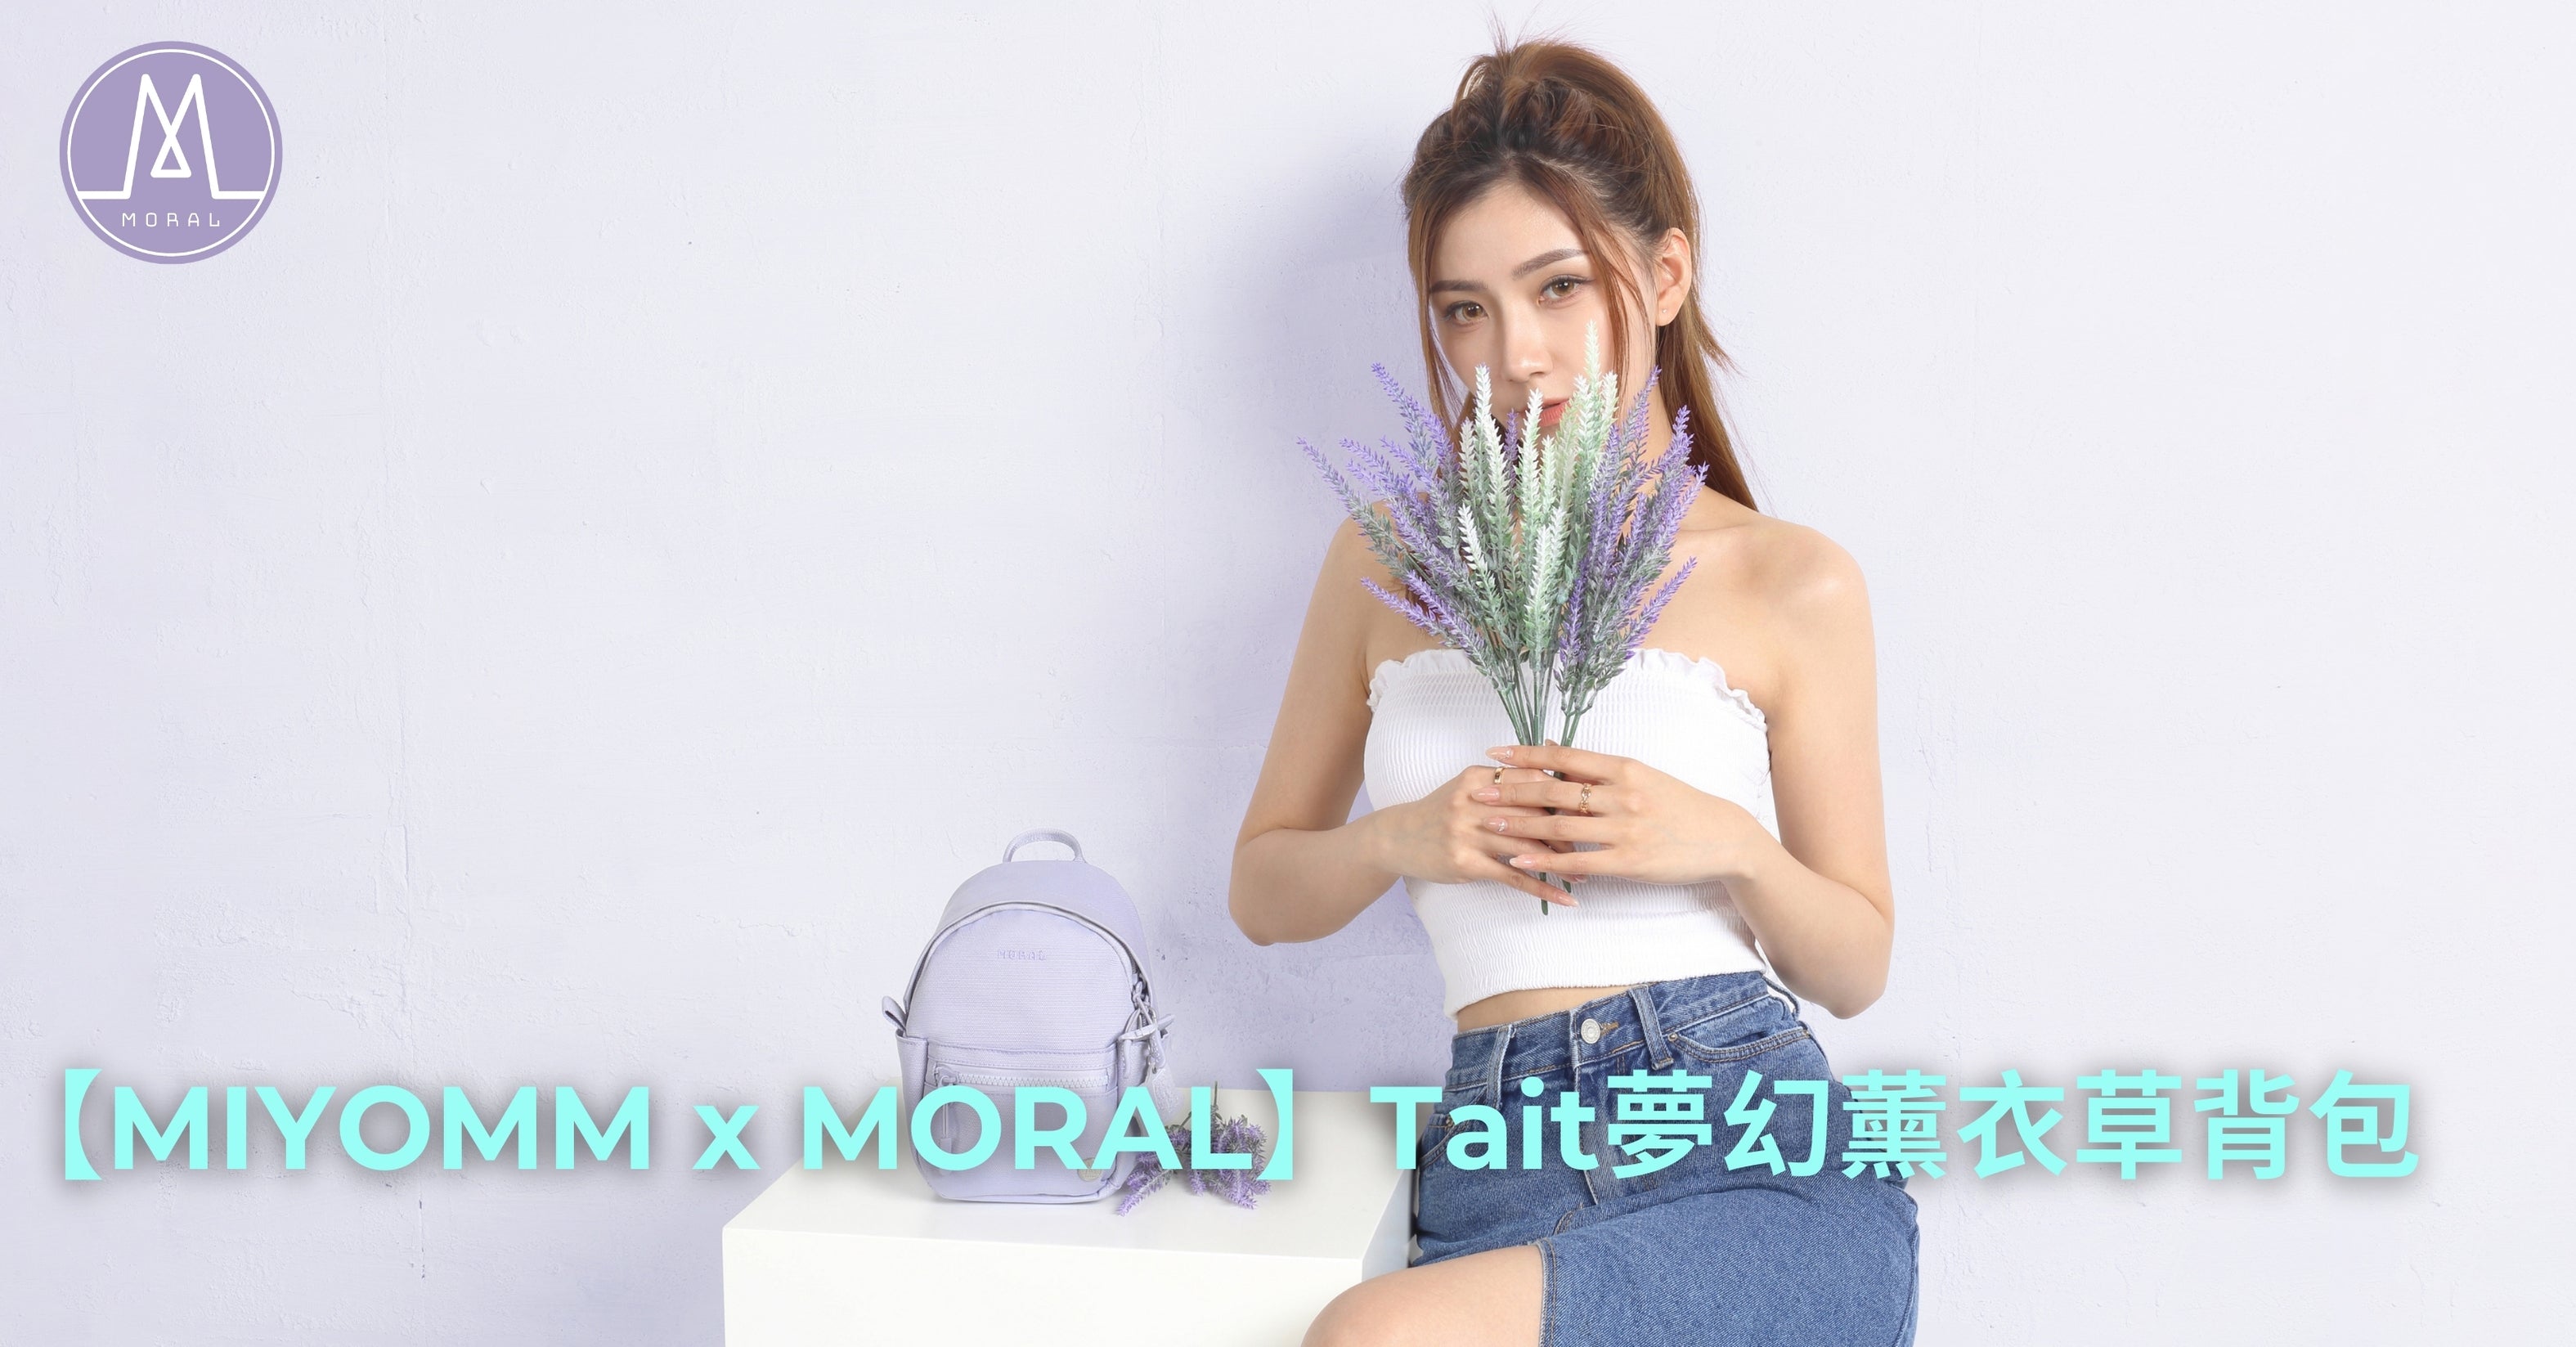 【MIYOMM x MORAL】 Launches Tait “CHOC A BLOC” Backpack in Dreamy Lavender Color Made from Recycled Plastic Bottles, Leading the Sustainable Fashion Trend